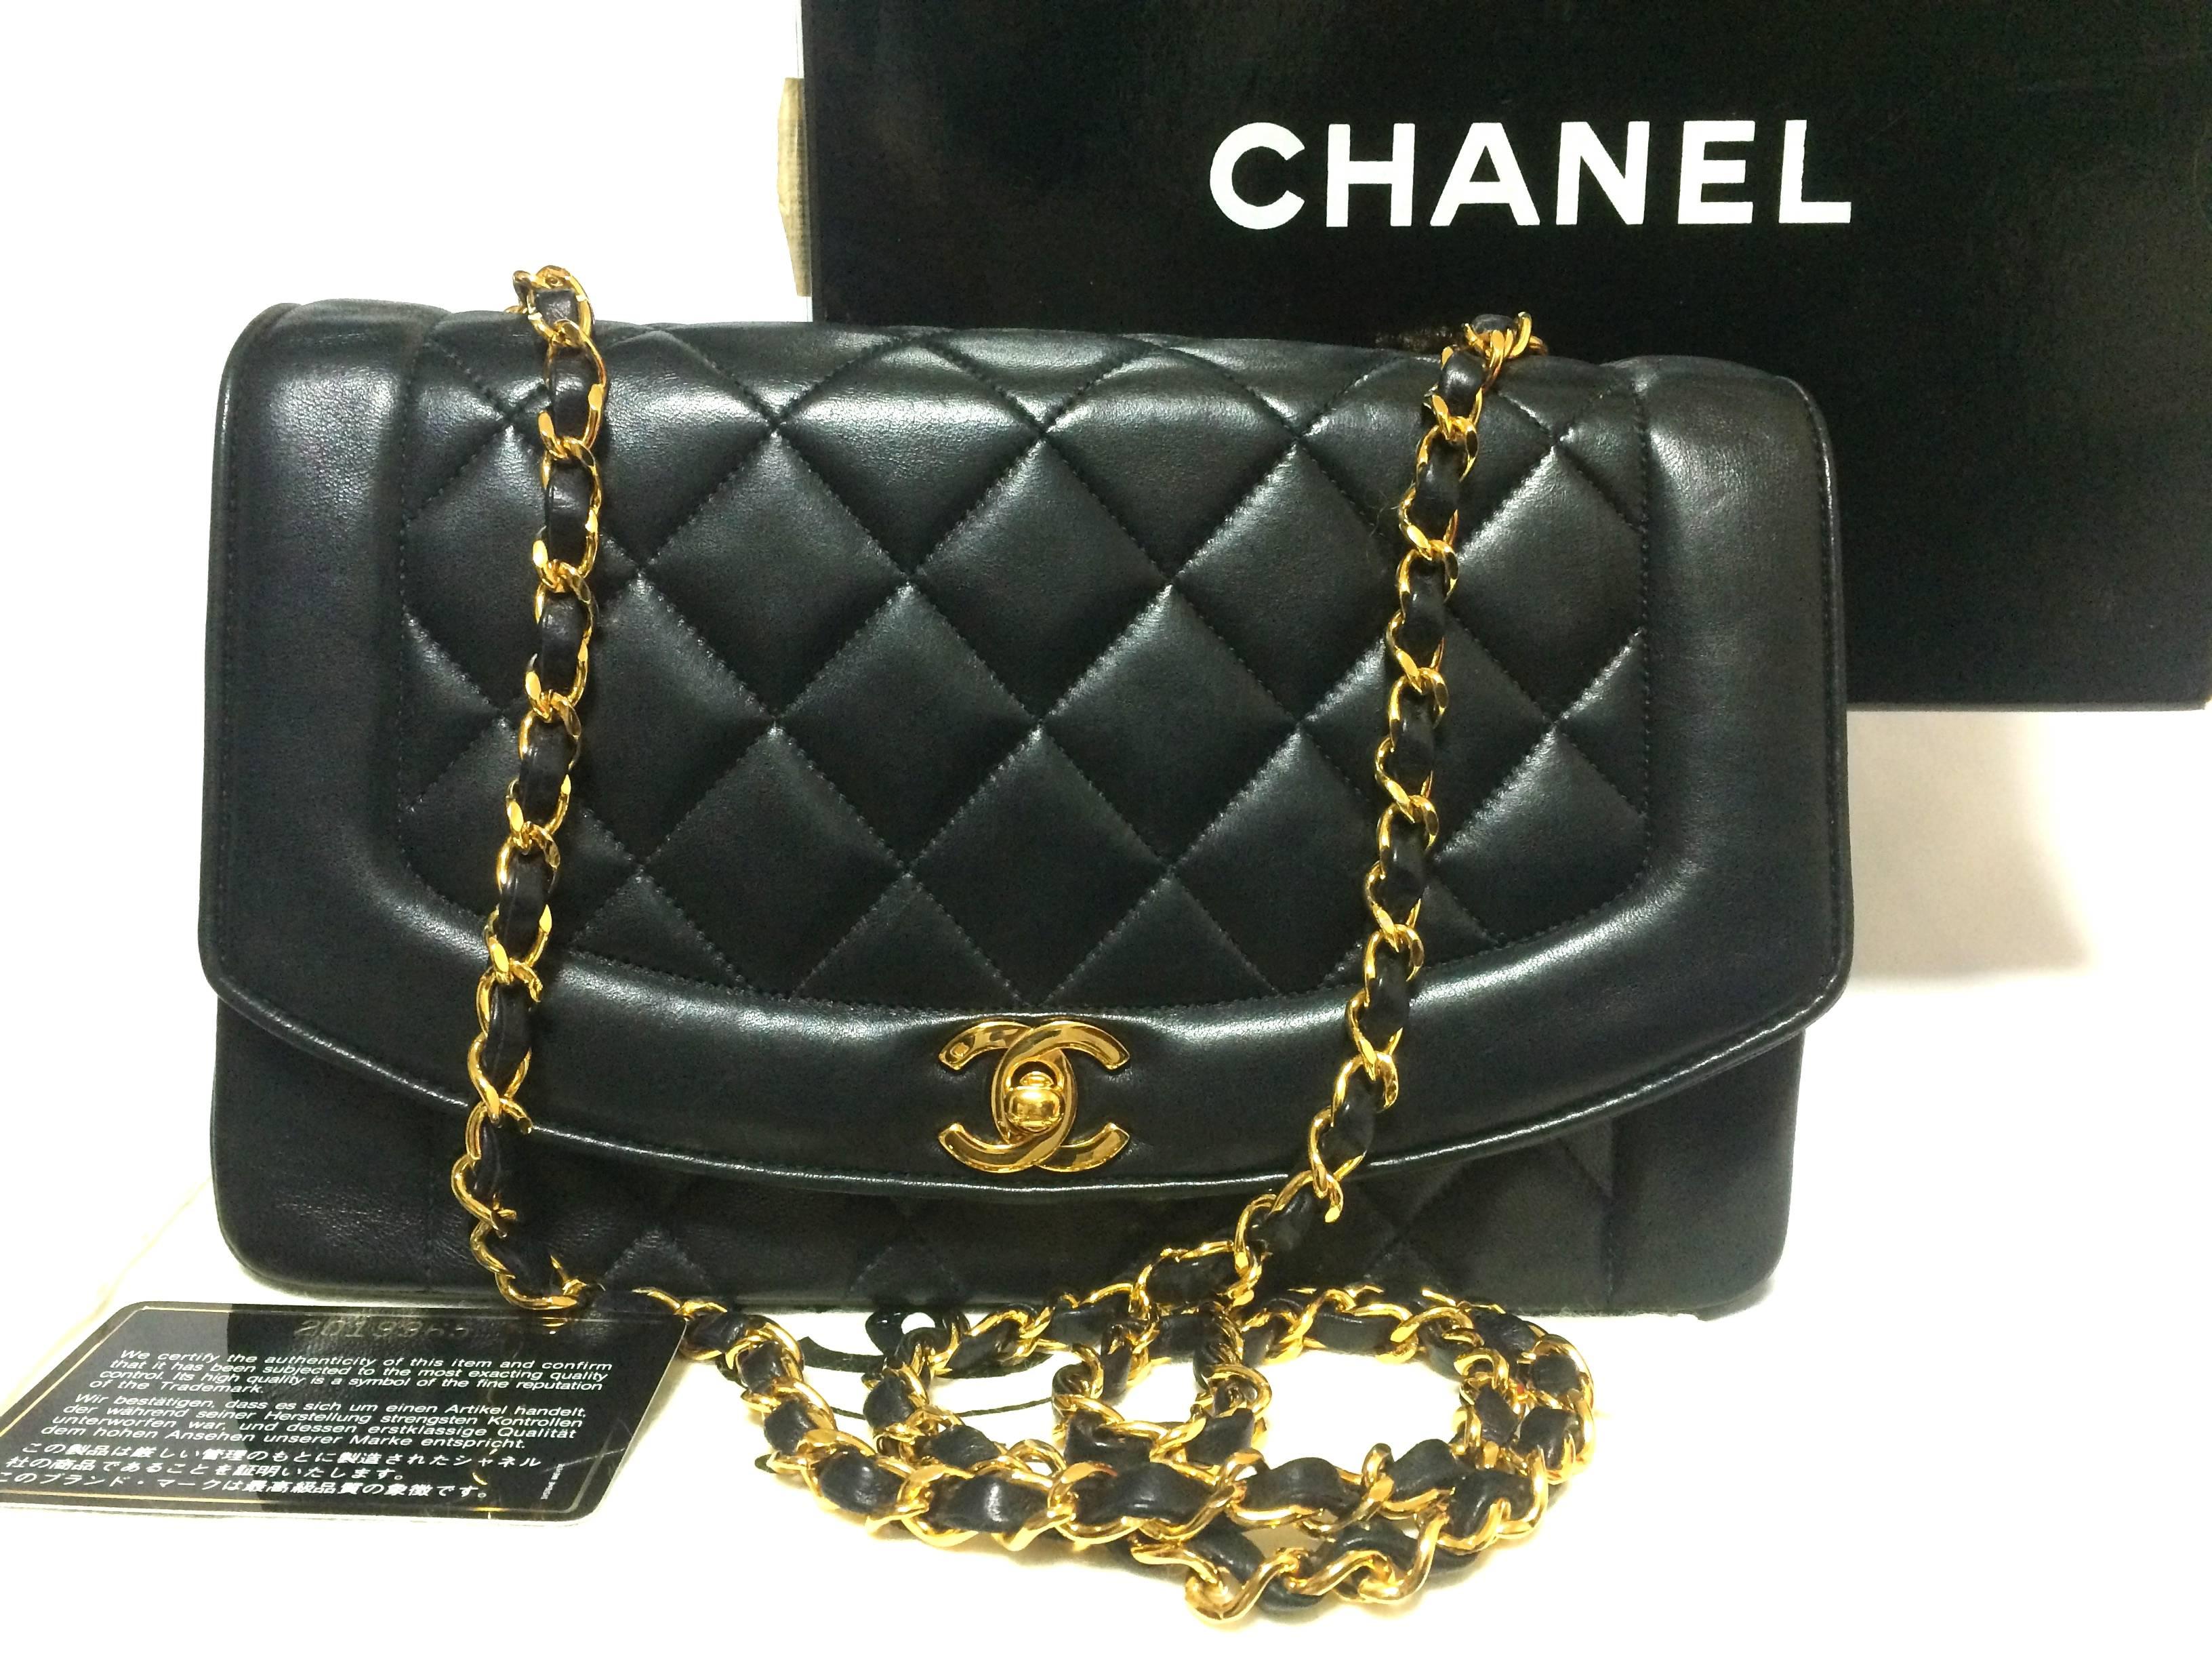 1990s. MINT. Vintage CHANEL black lambskin classic 2.55 chain shoulder bag with golden CC. Best vintage purse for rest of your life.

Here is another one of the most classic vintage bags from Chanel back in the 90s....
This classic black lambskin